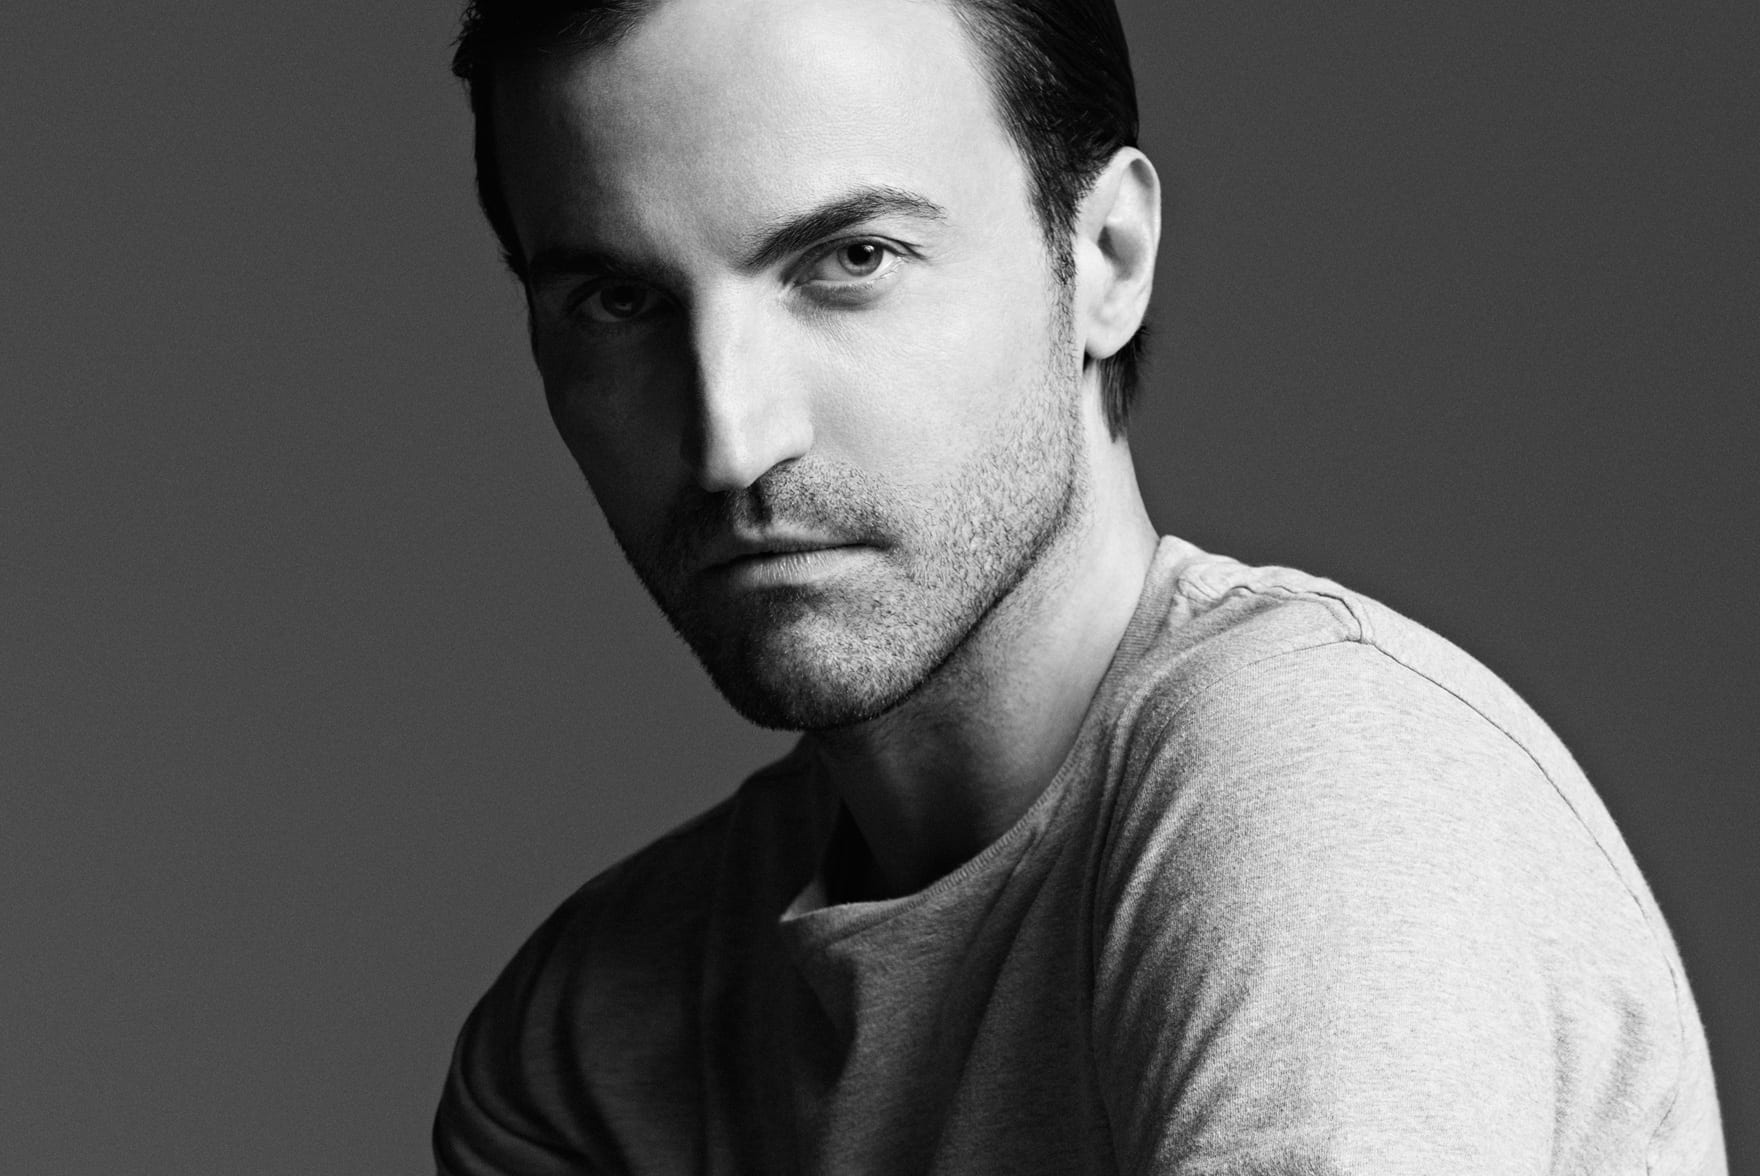 Outstanding debut for Nicolas Ghesquière - LVMH